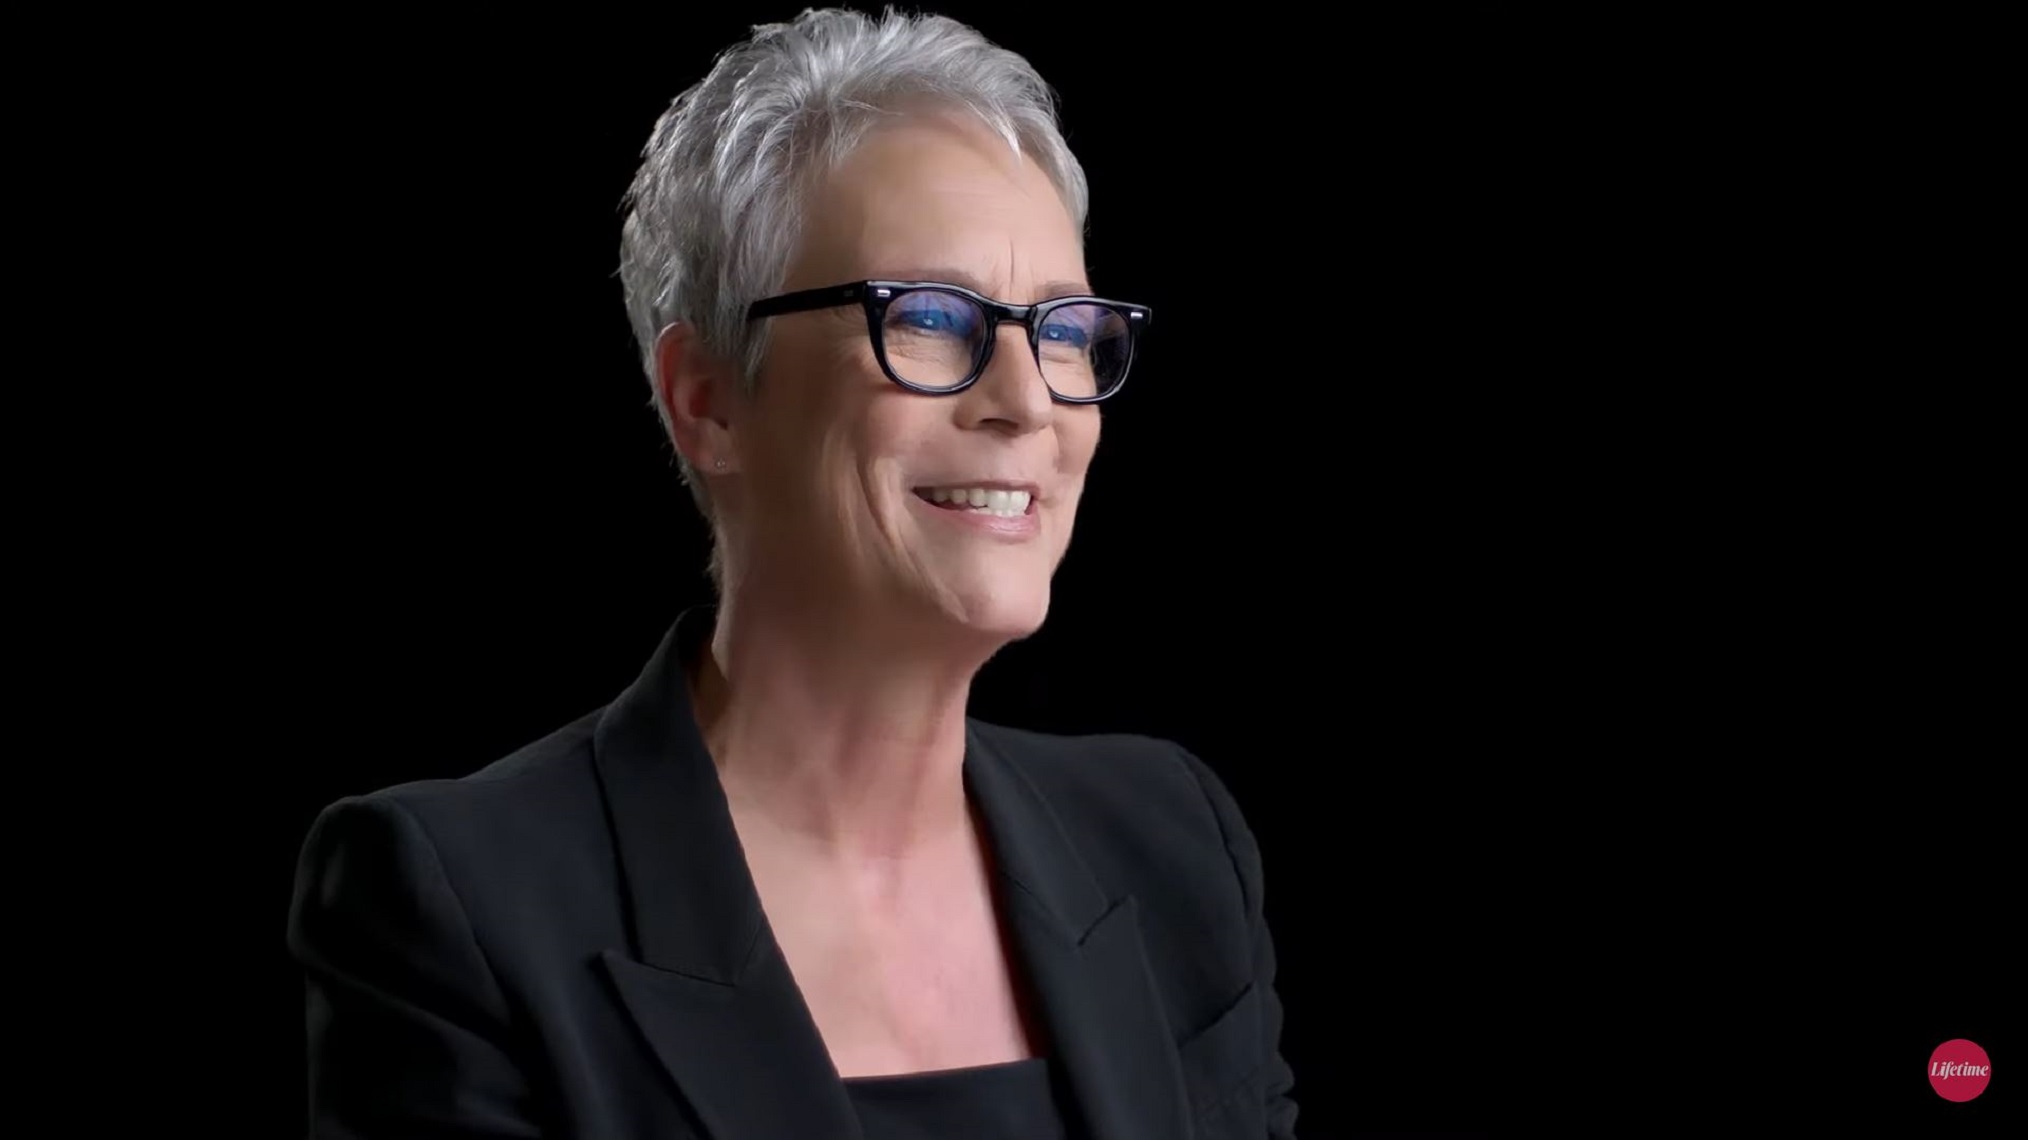 Lifetime Announces Slate of New Films Featuring Jamie Lee Curtis, Robin Rob...